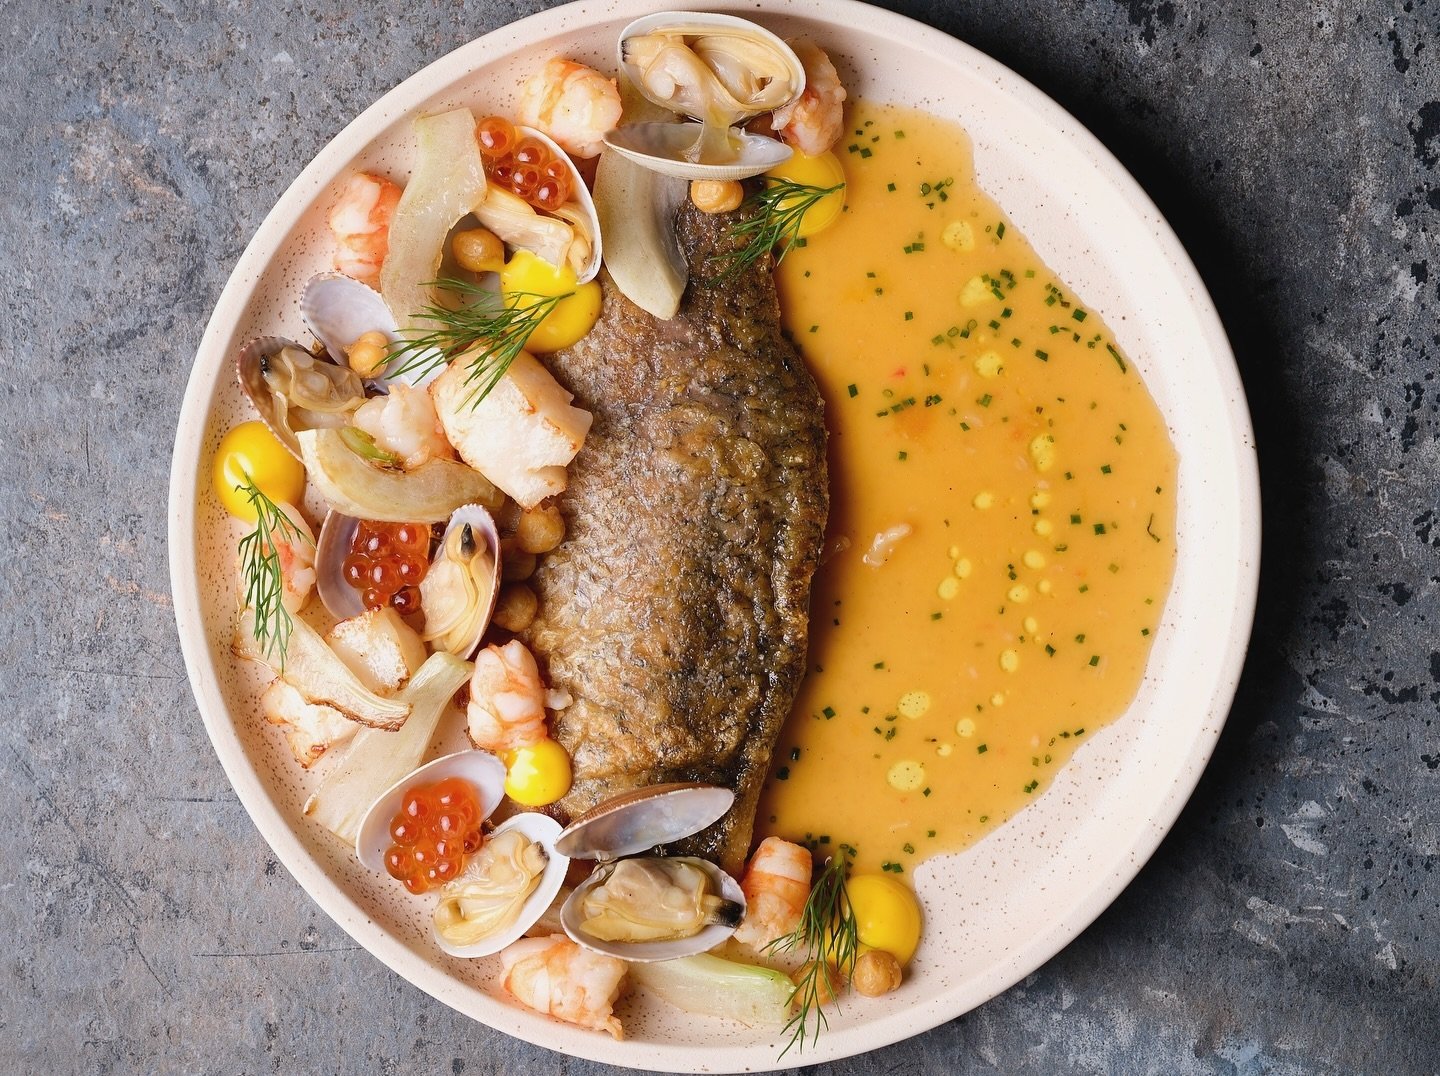 A plate with powerful flavours🍴

Pan-Seared Barramundi with bouillabaisse, clams, prawns, scallops, chickpeas, fennel and saffron aioli.